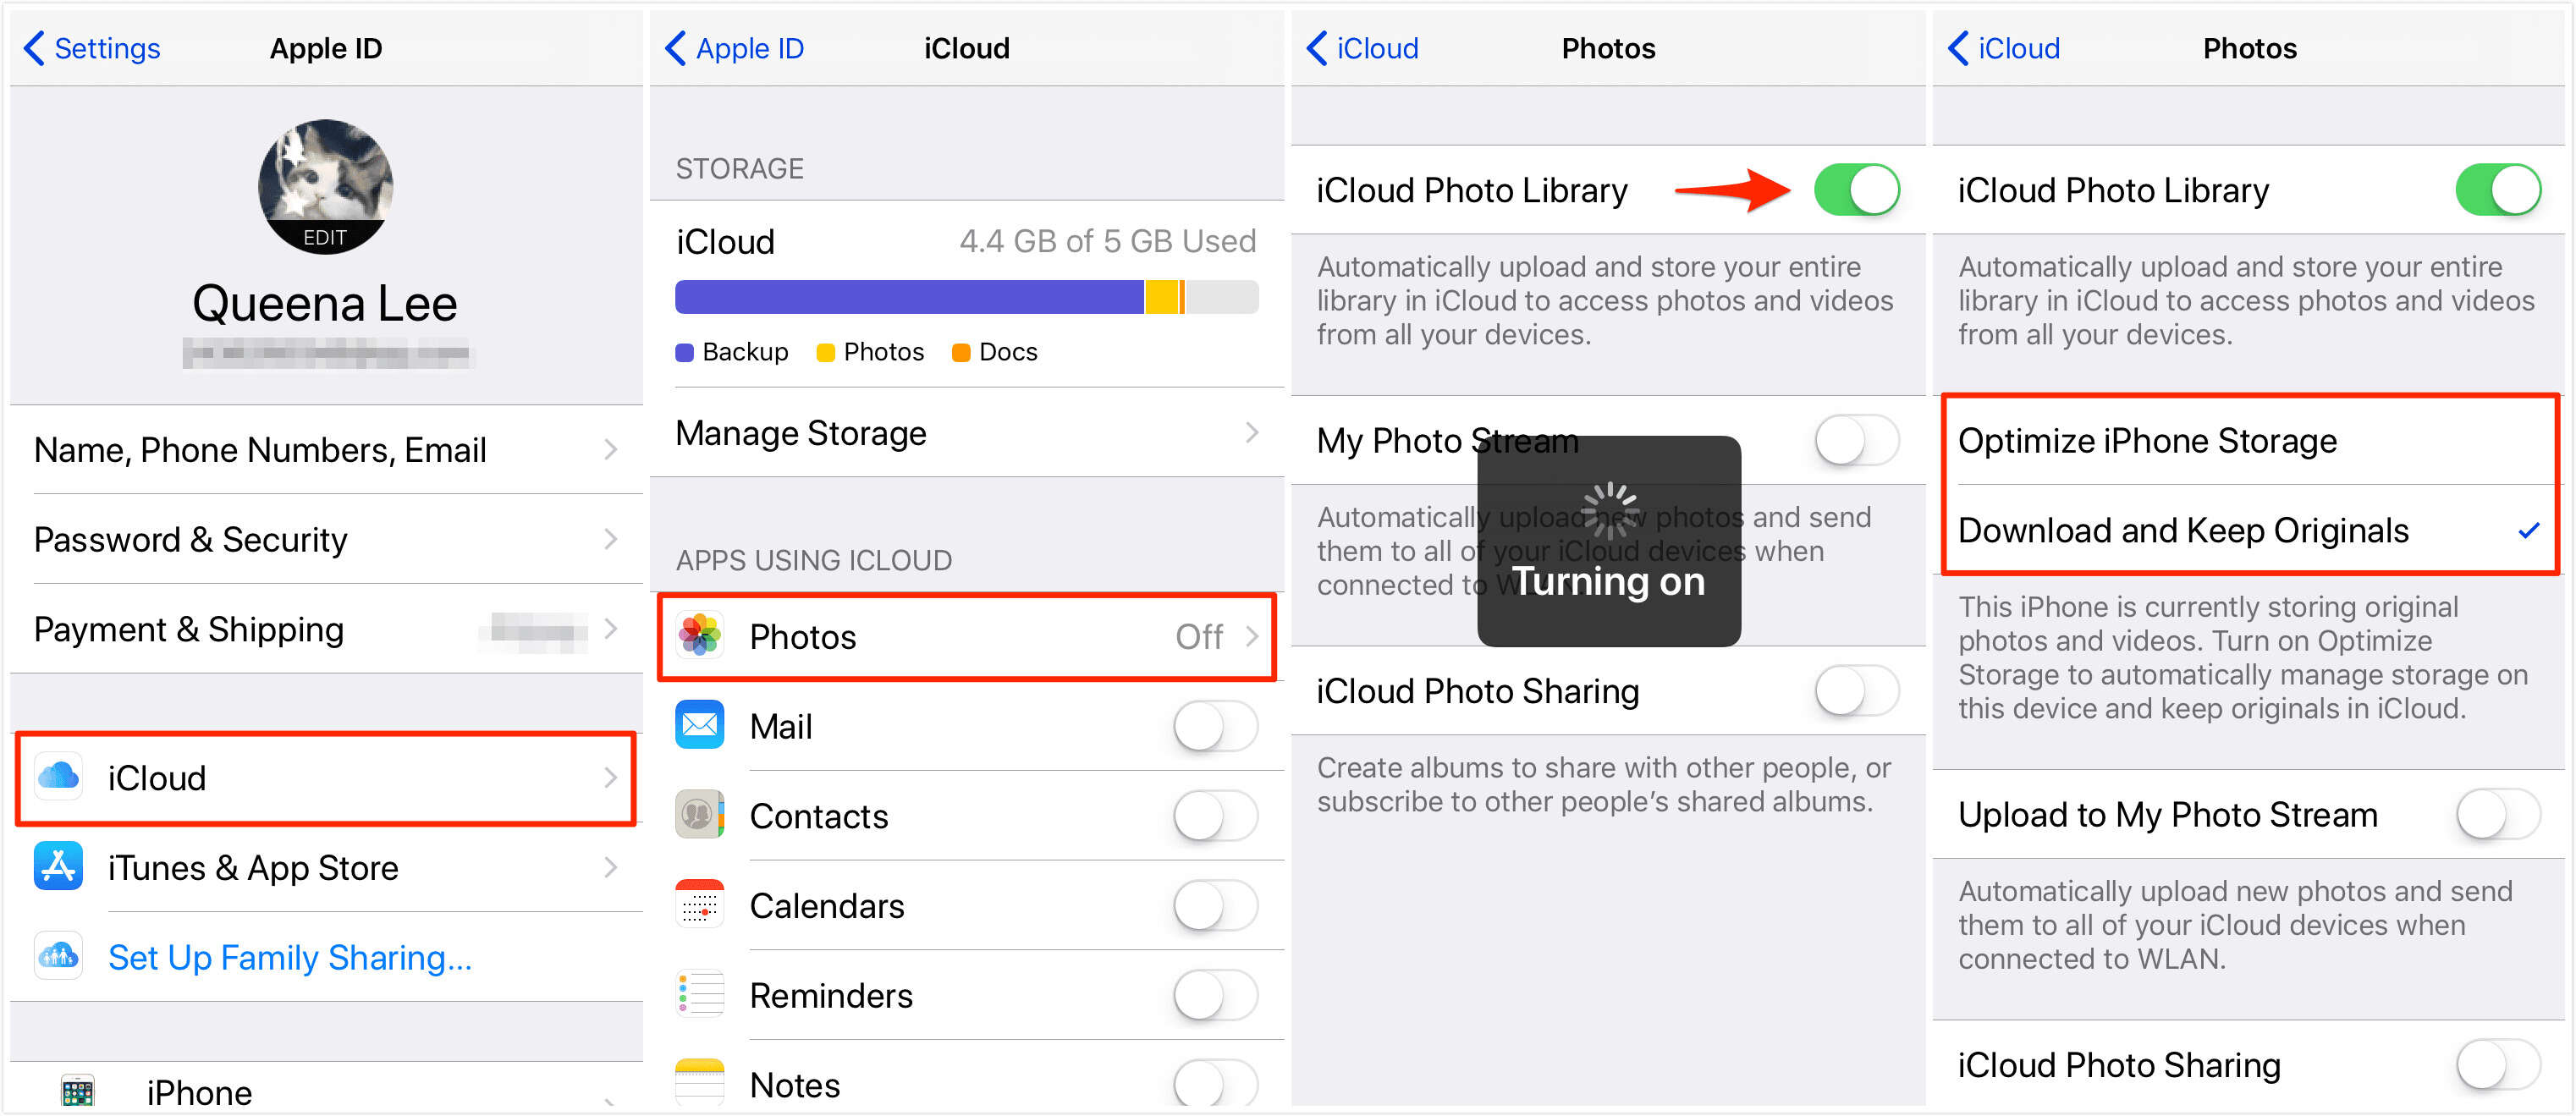 how-to-transfer-photos-from-ipad-to-ipad-solutions-you-need-to-know